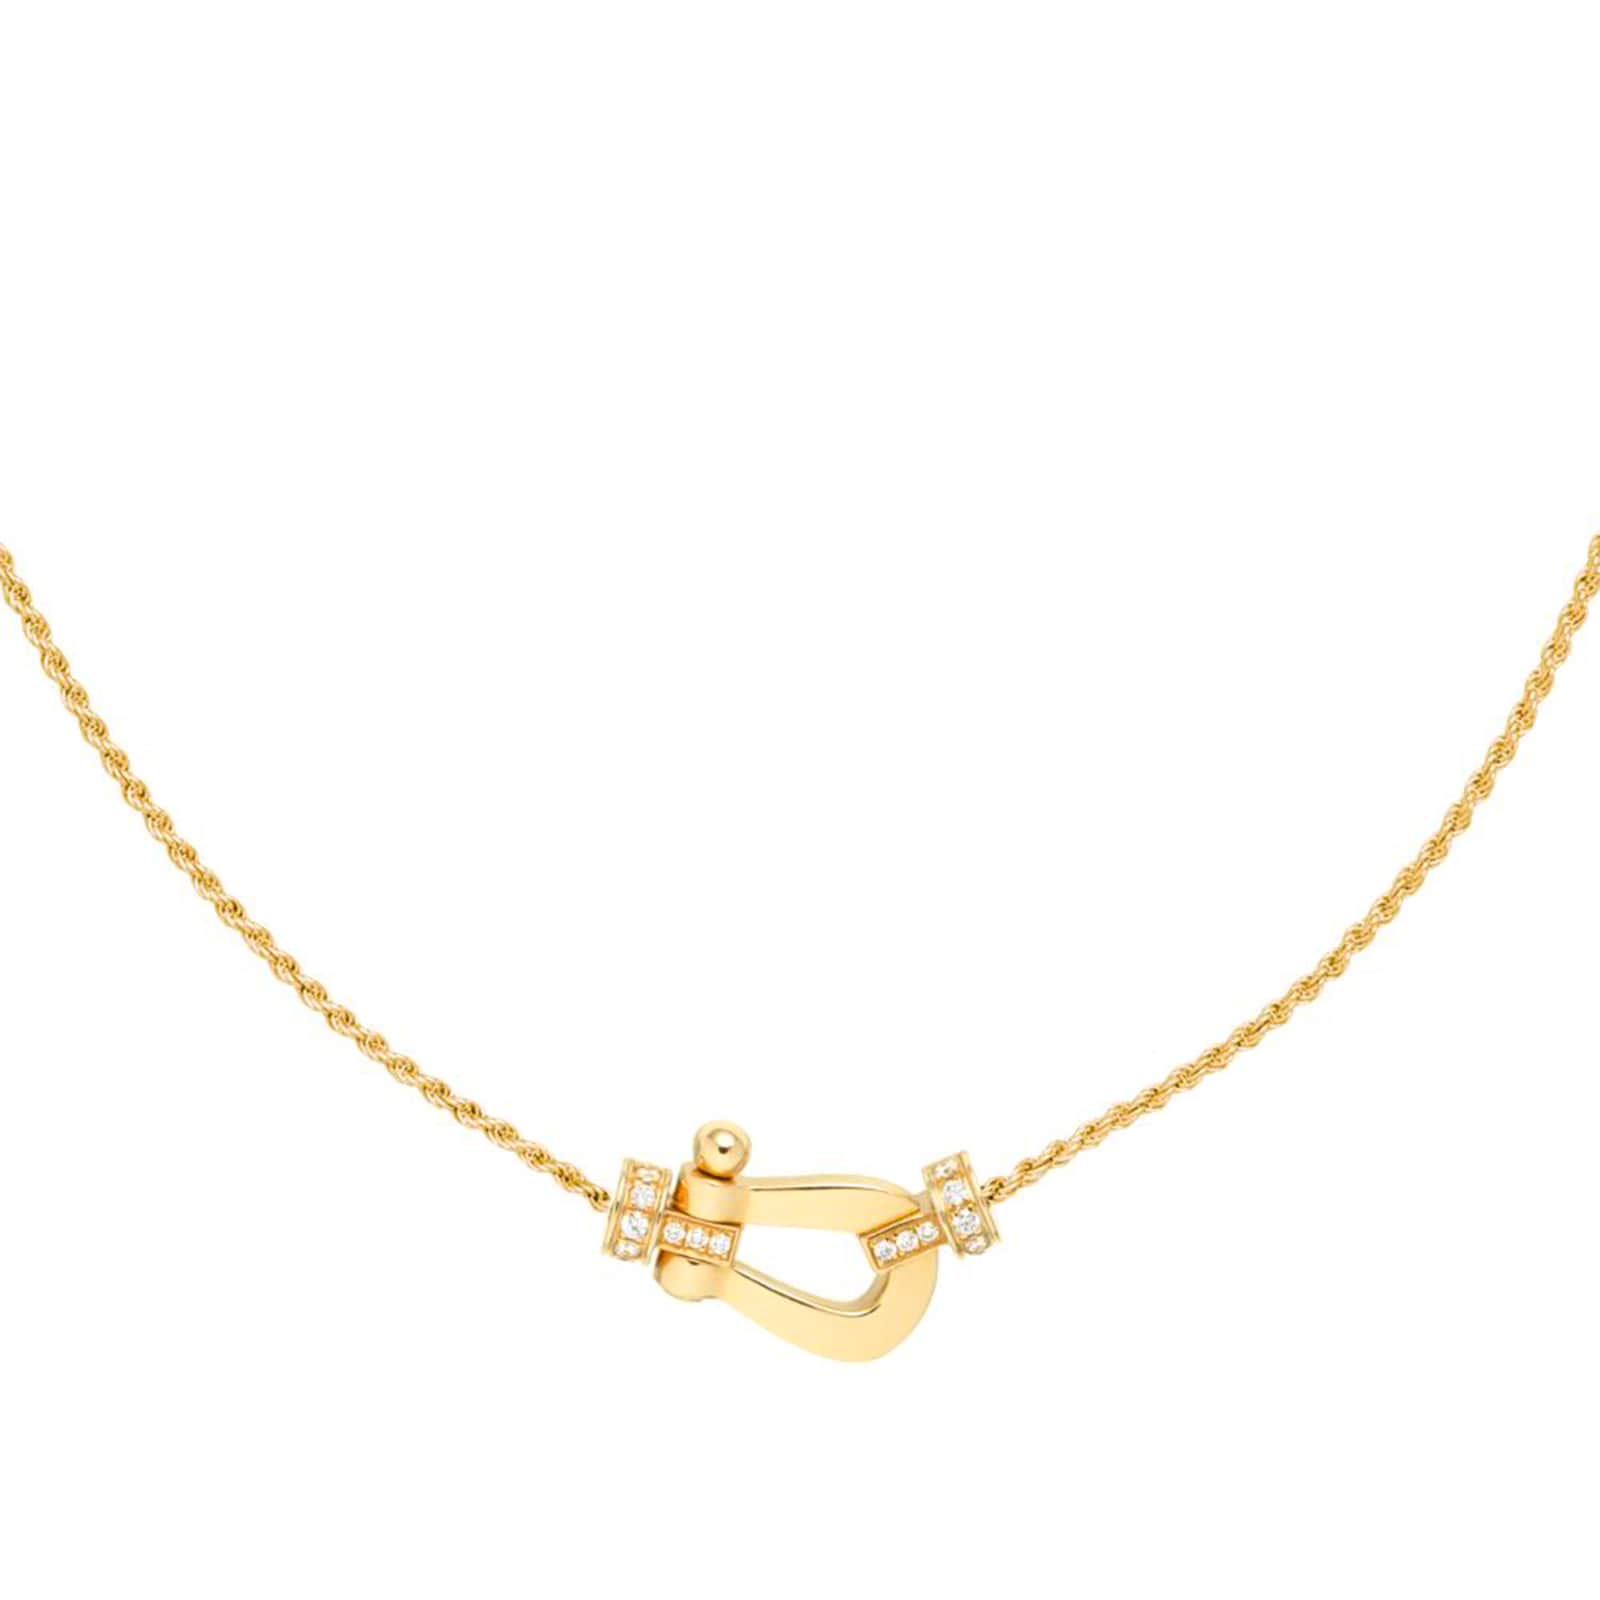 force 10 necklace 18ct yellow gold 0.13ct diamond necklace